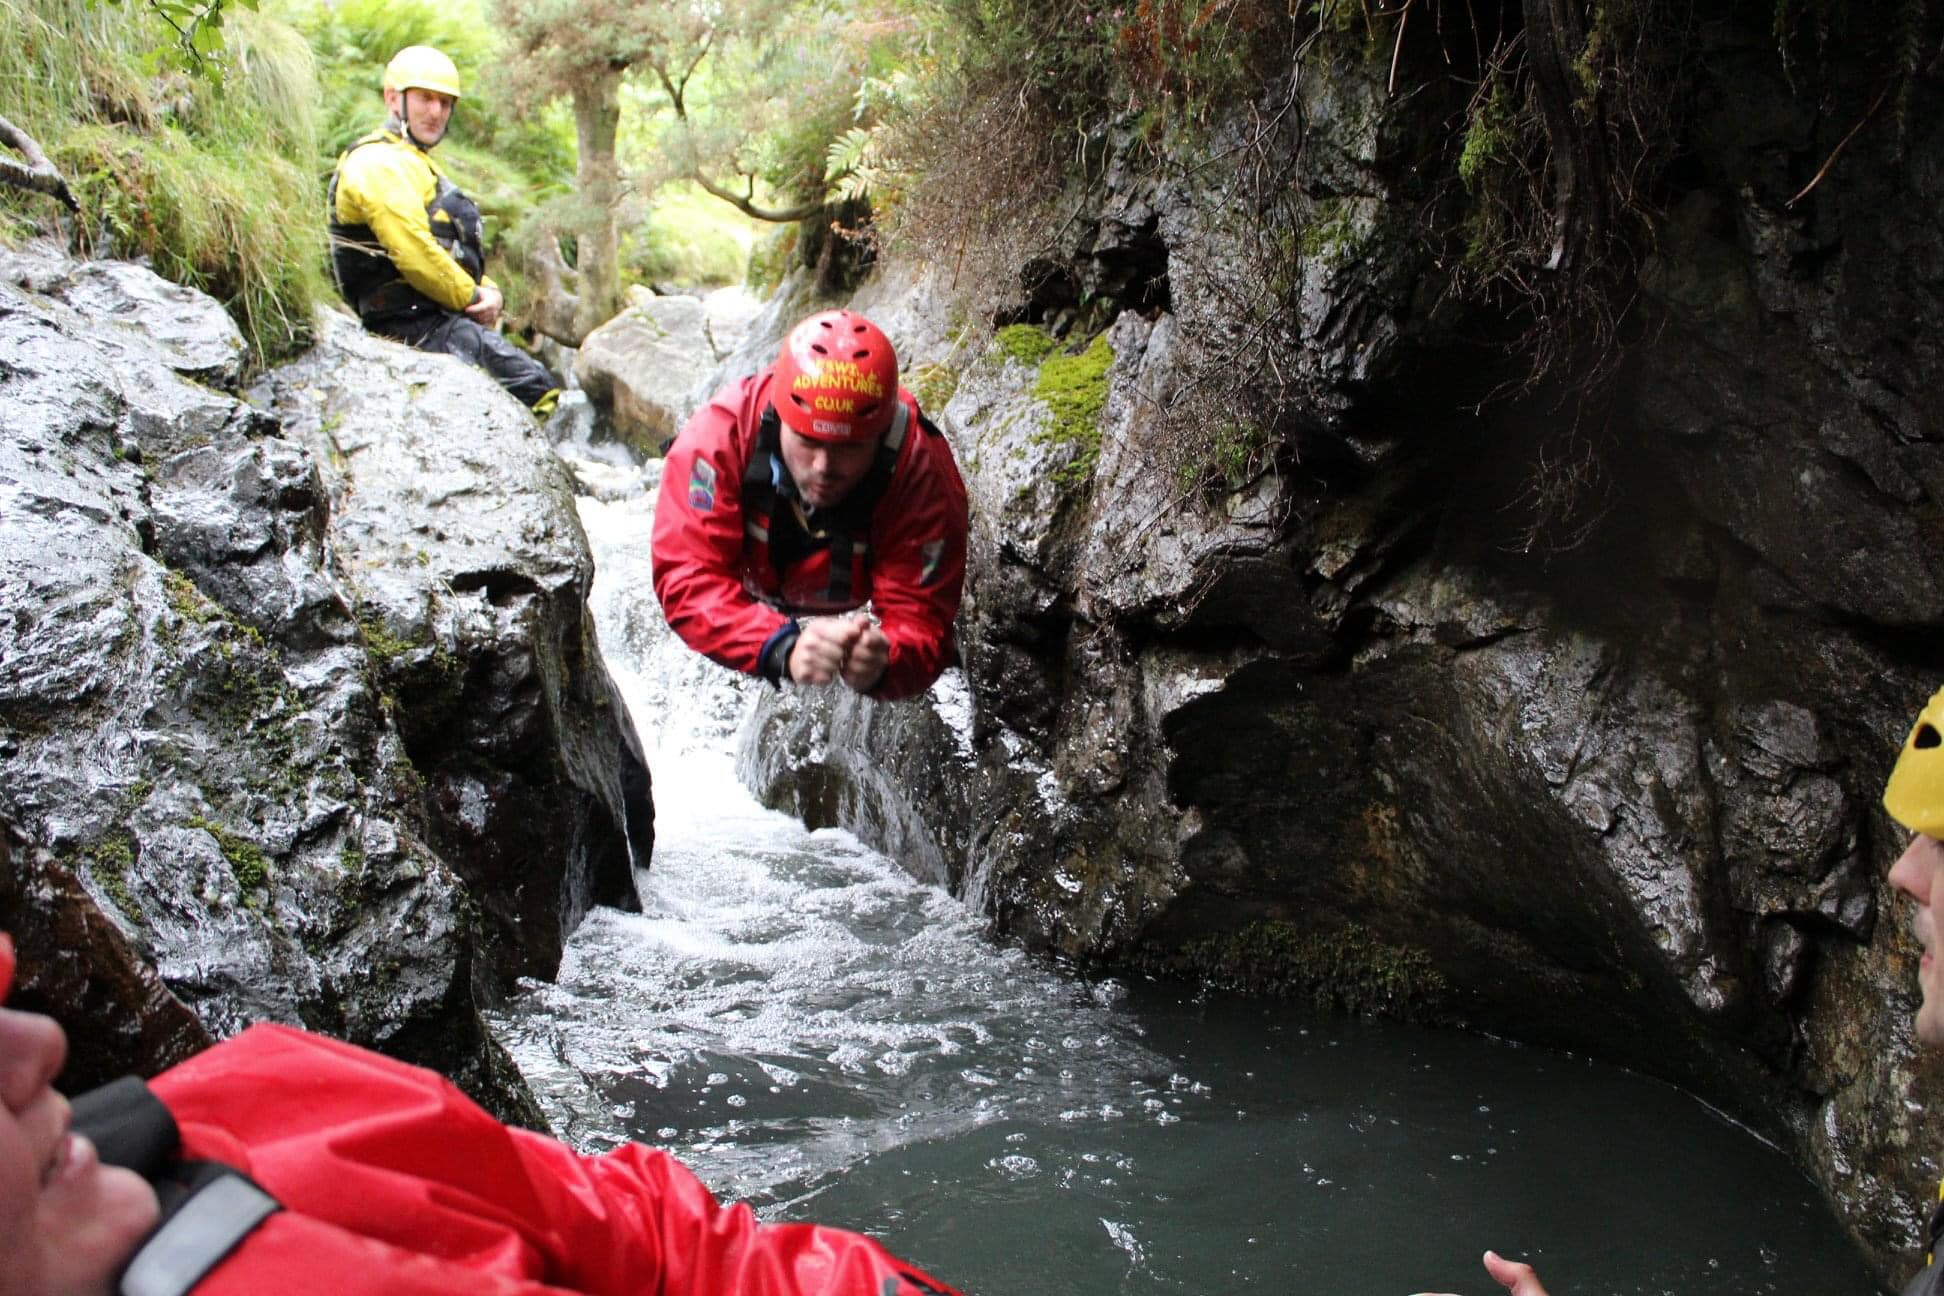 Jumping into water during canyoning